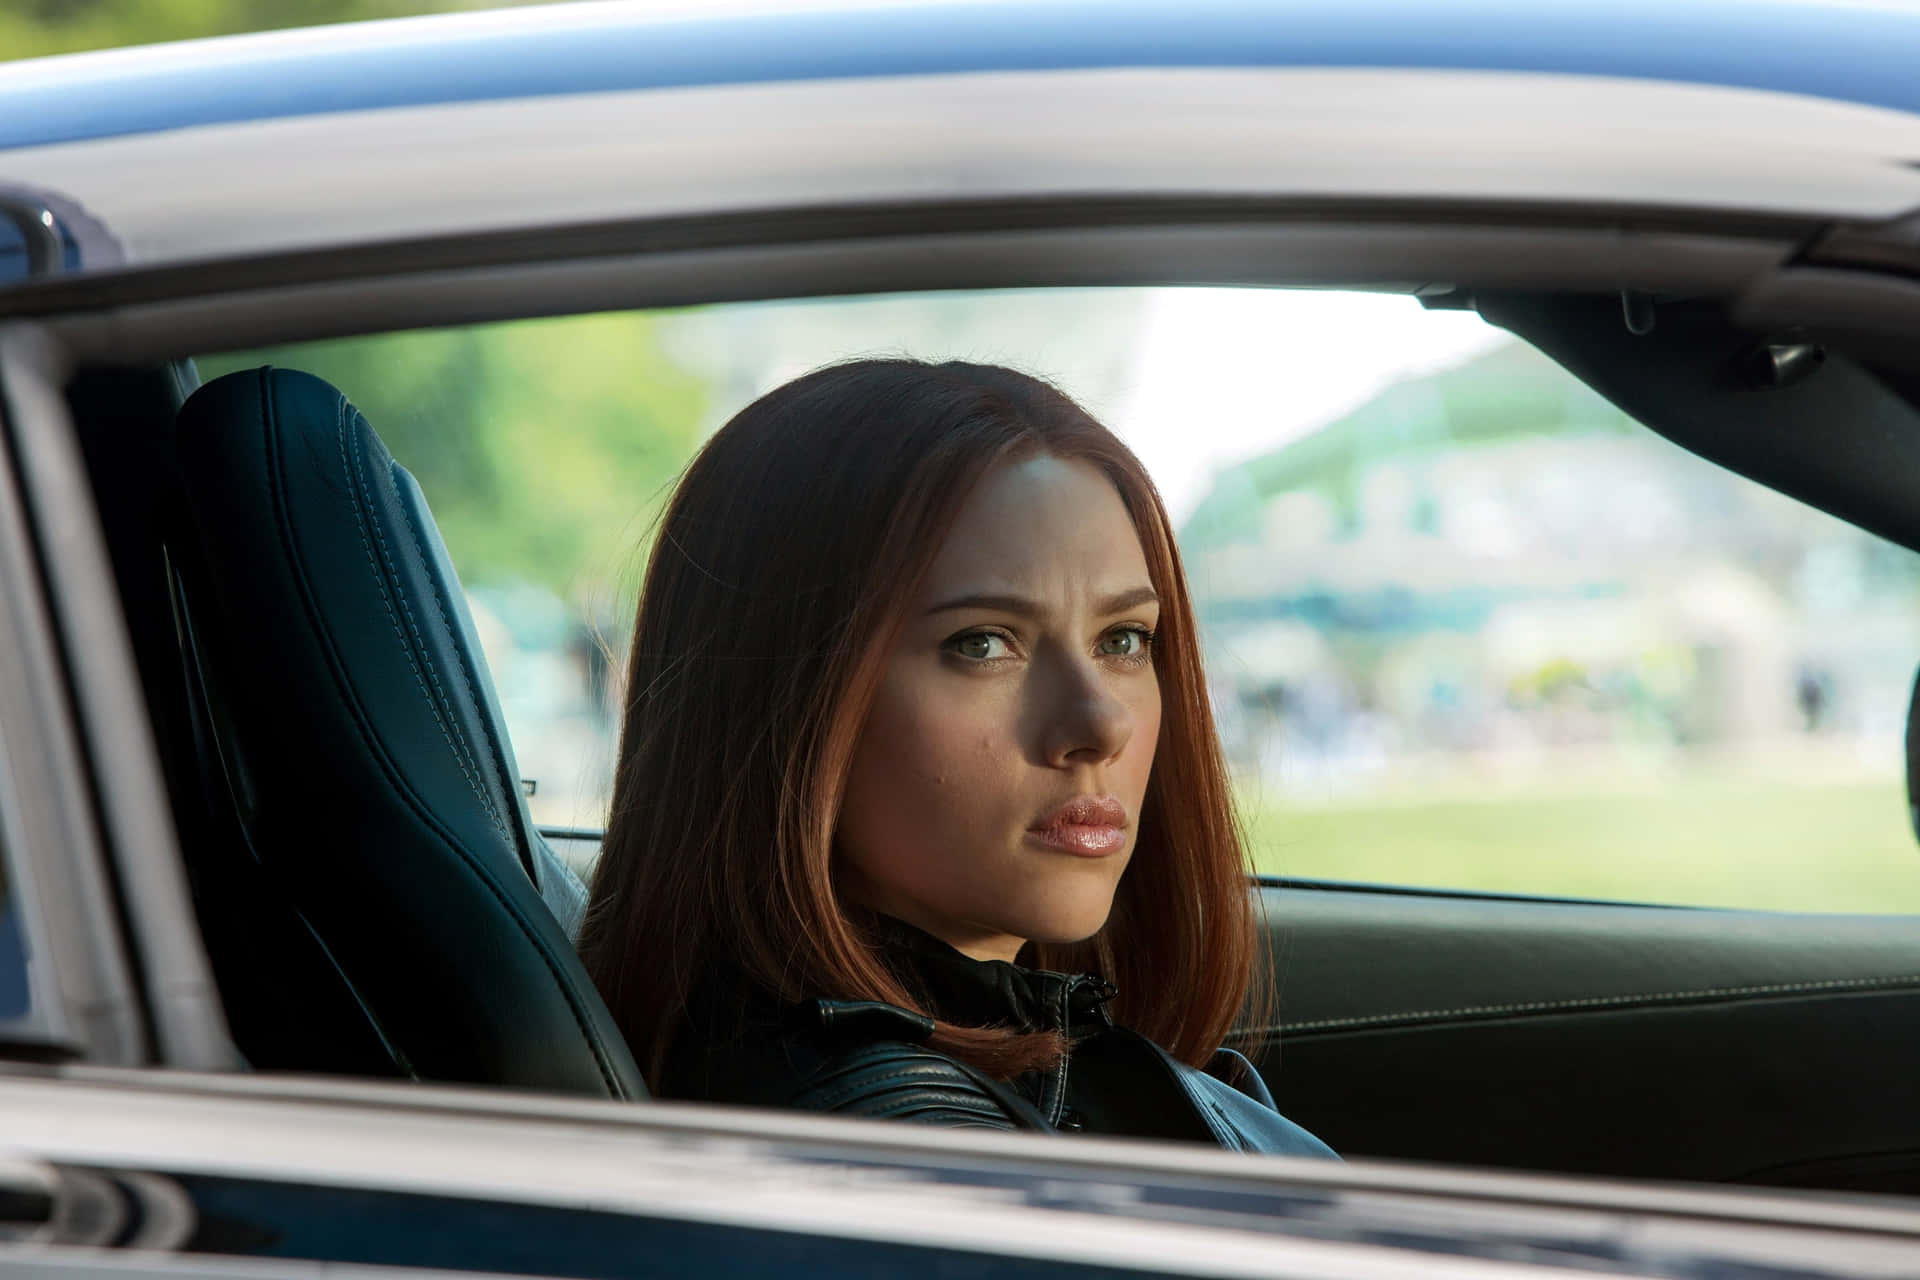 Scarlet Johanohanson as Natasha Romanoff, more commonly known as Black Widow, in the Marvel Cinematic Universe: